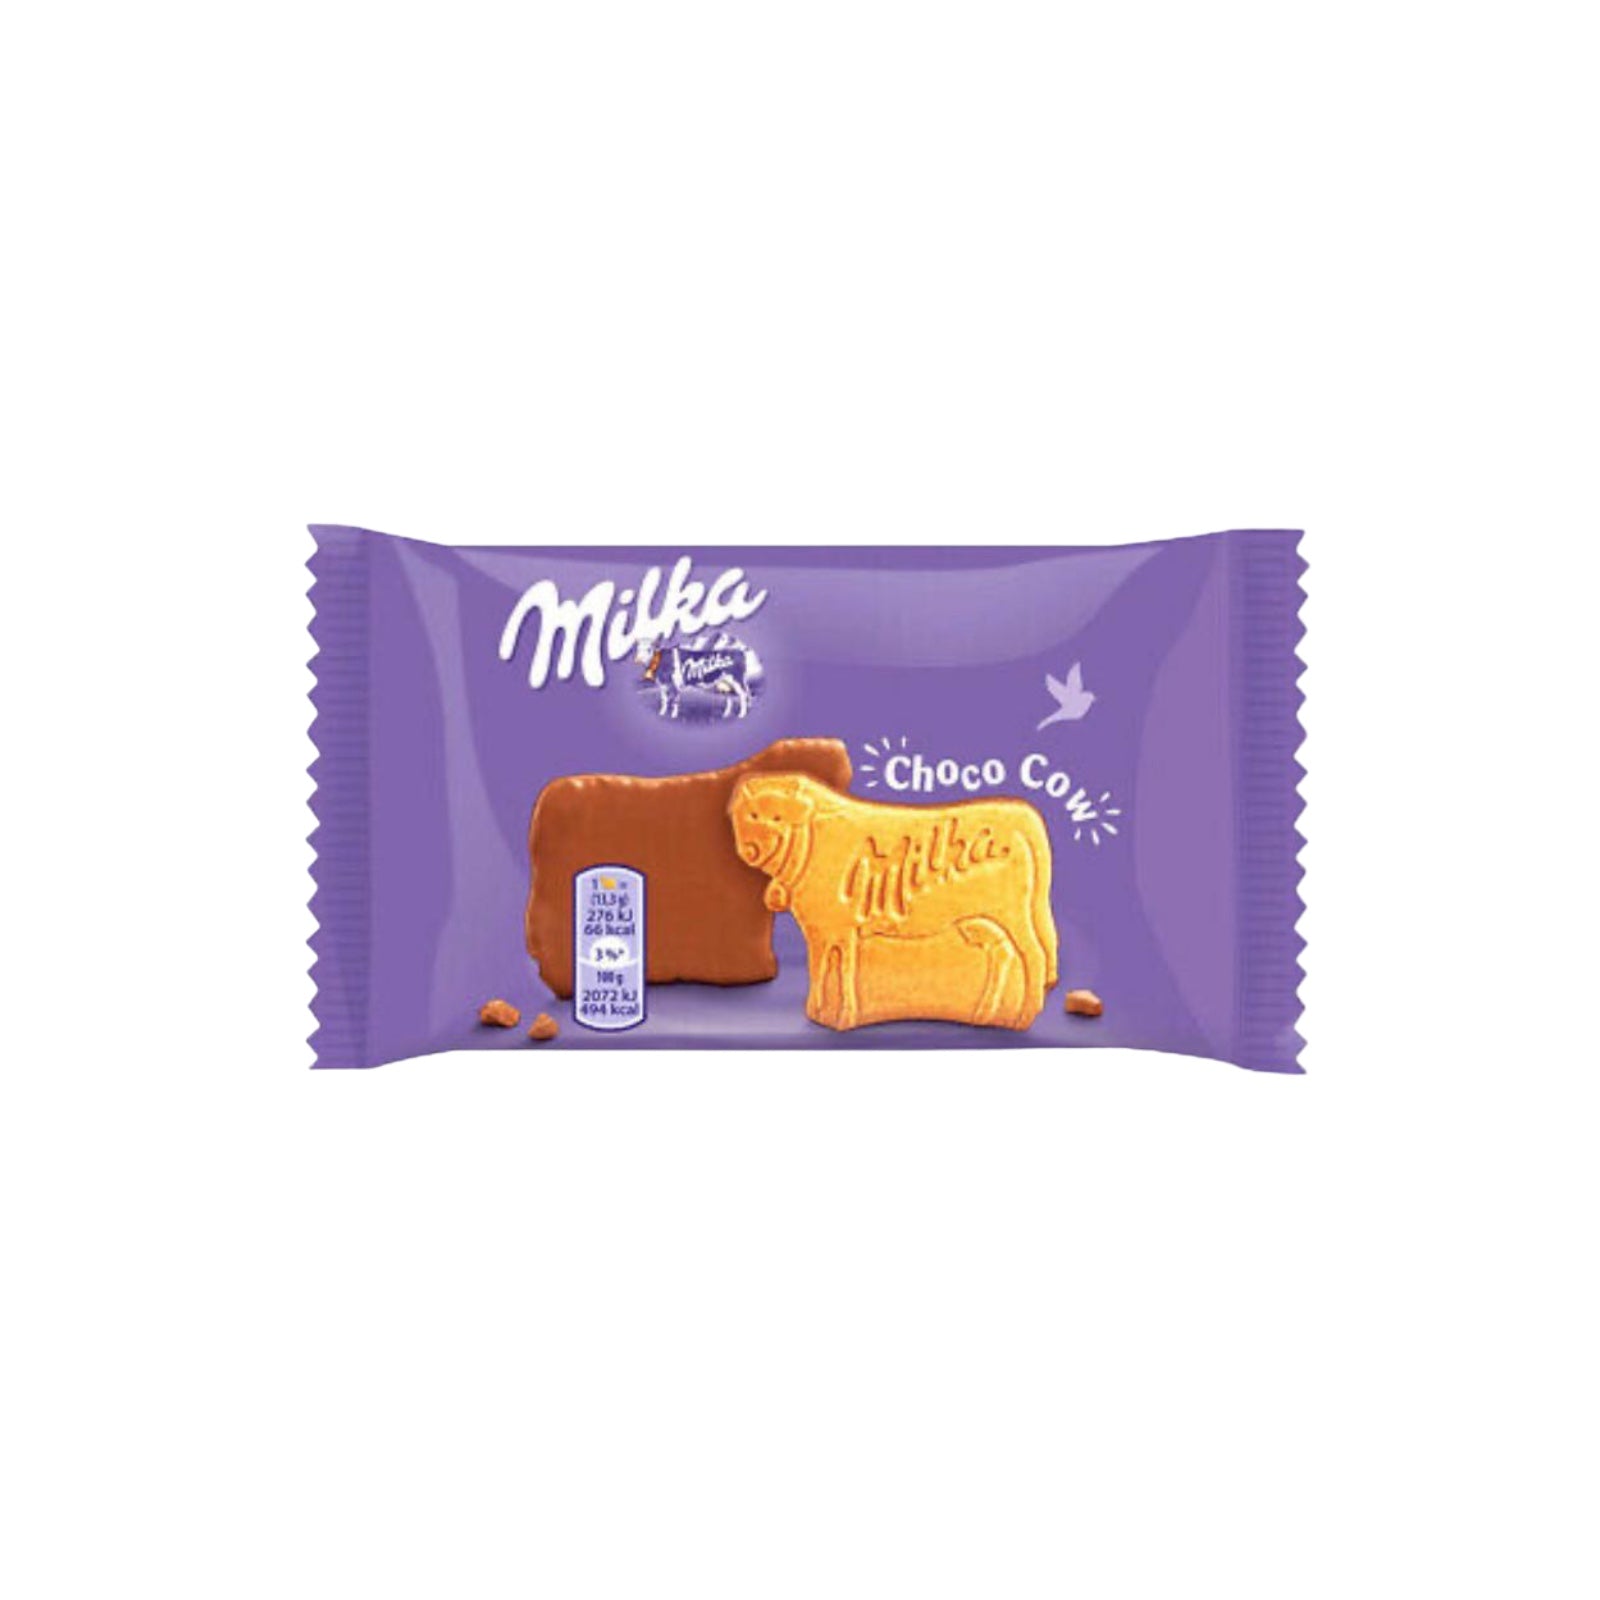 Milka Choco Cow Biscuits 40g